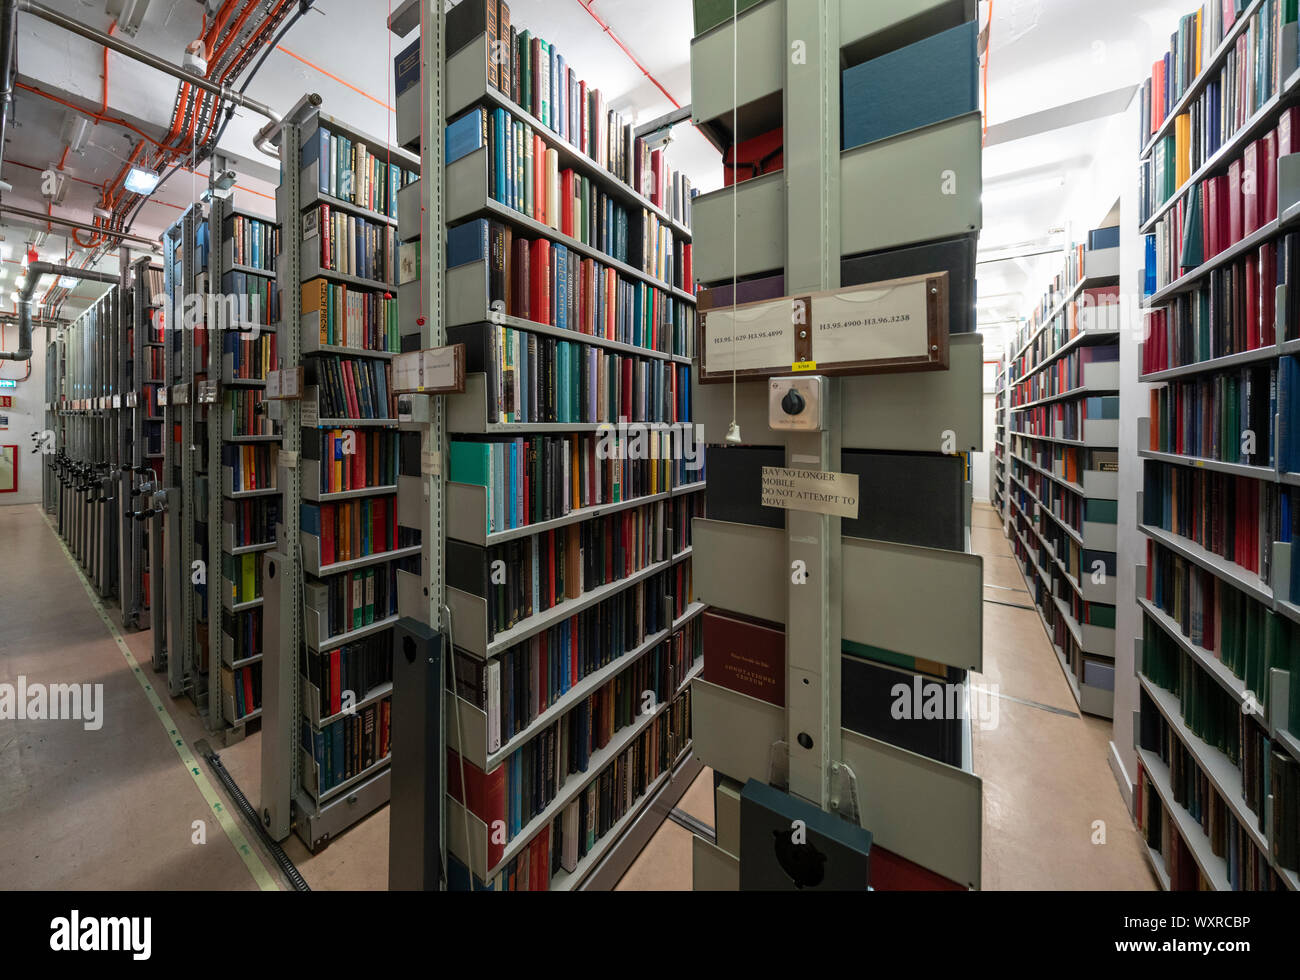 Interior of book storage floor of the National Library of Scotland in Edinburgh. Stock Photo